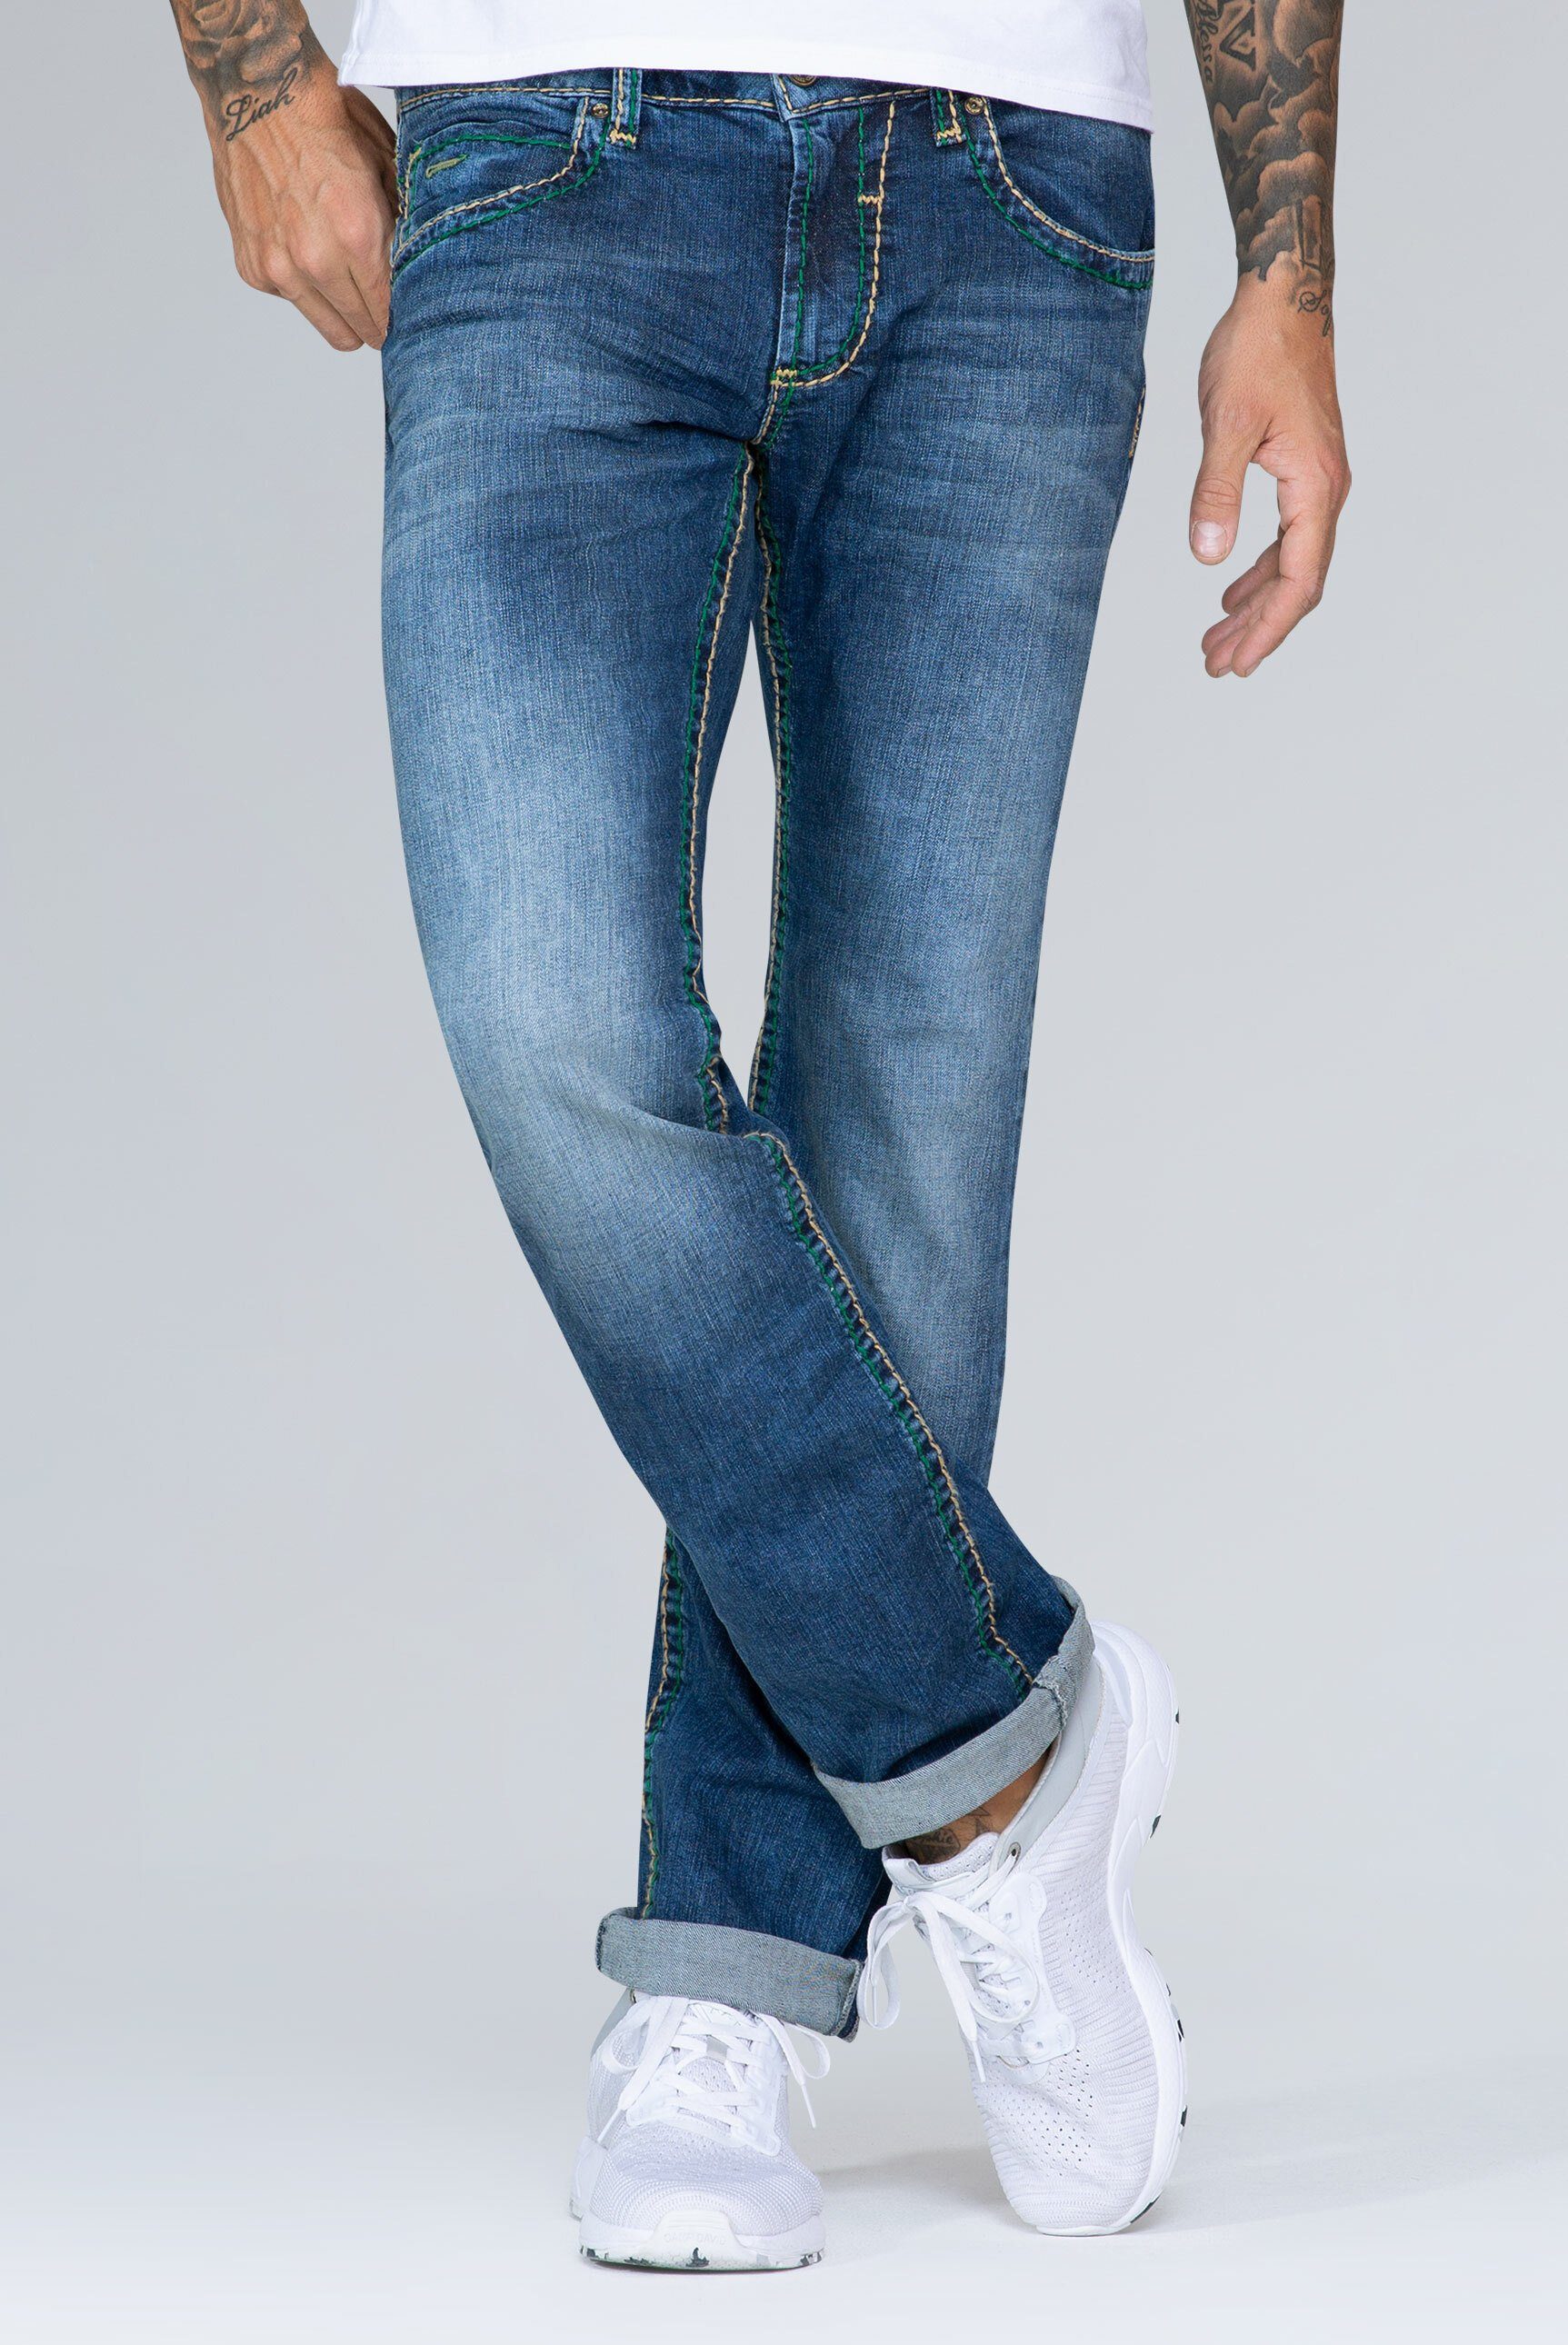 CAMP DAVID Regular-fit-Jeans NI:CO mit Used-Waschung